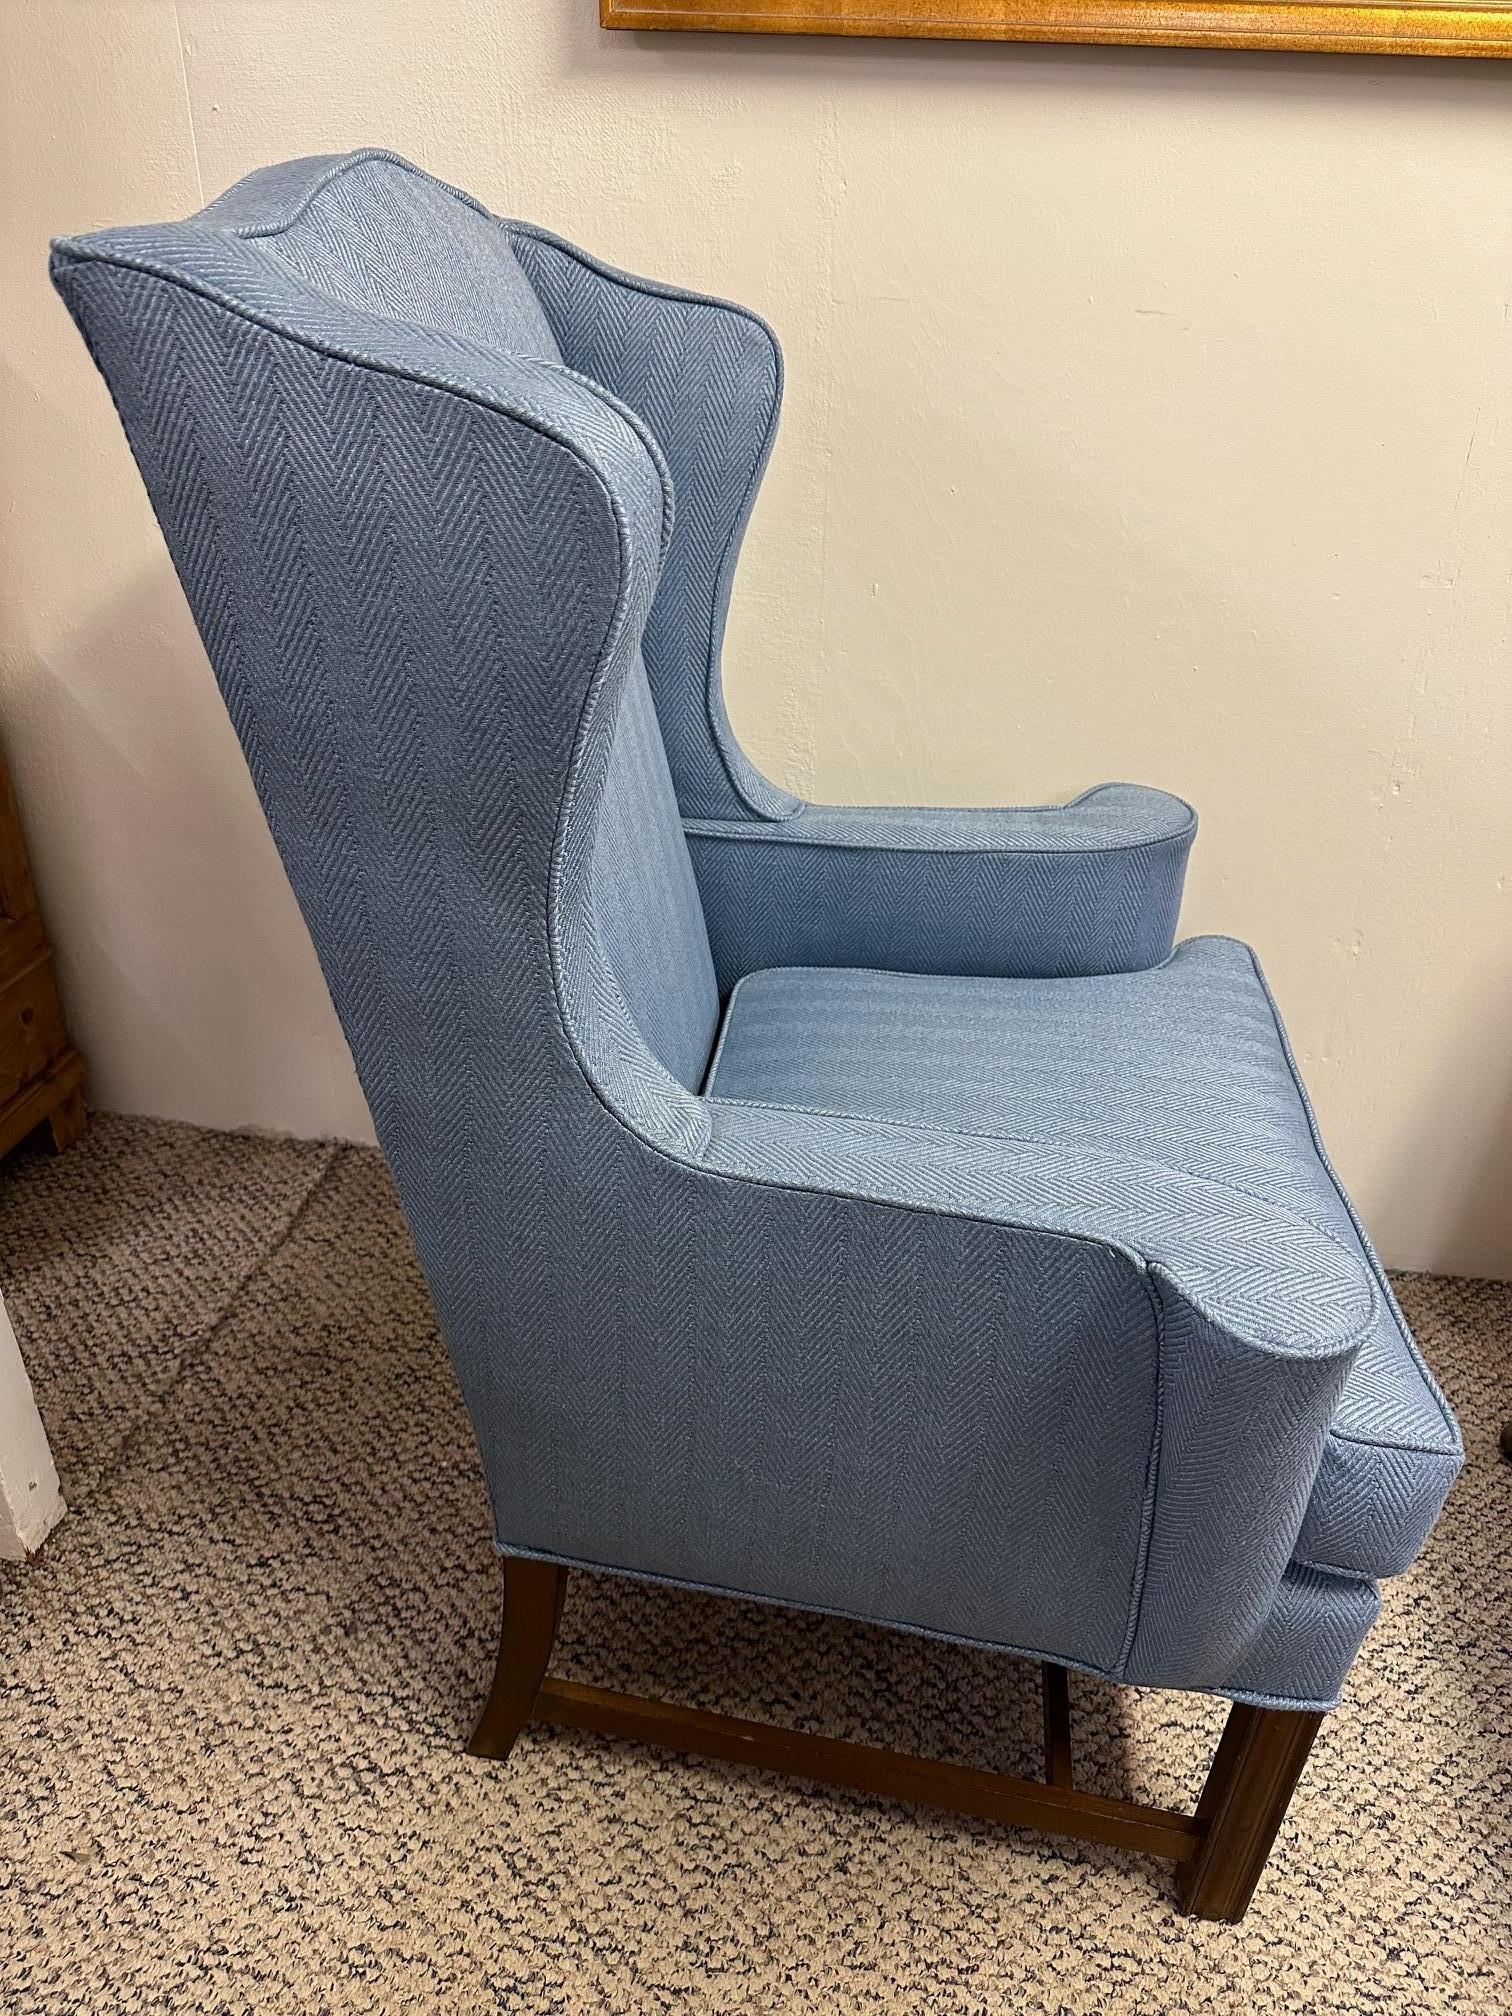 American Traditional Blue Upholstered Wingback Chair For Sale